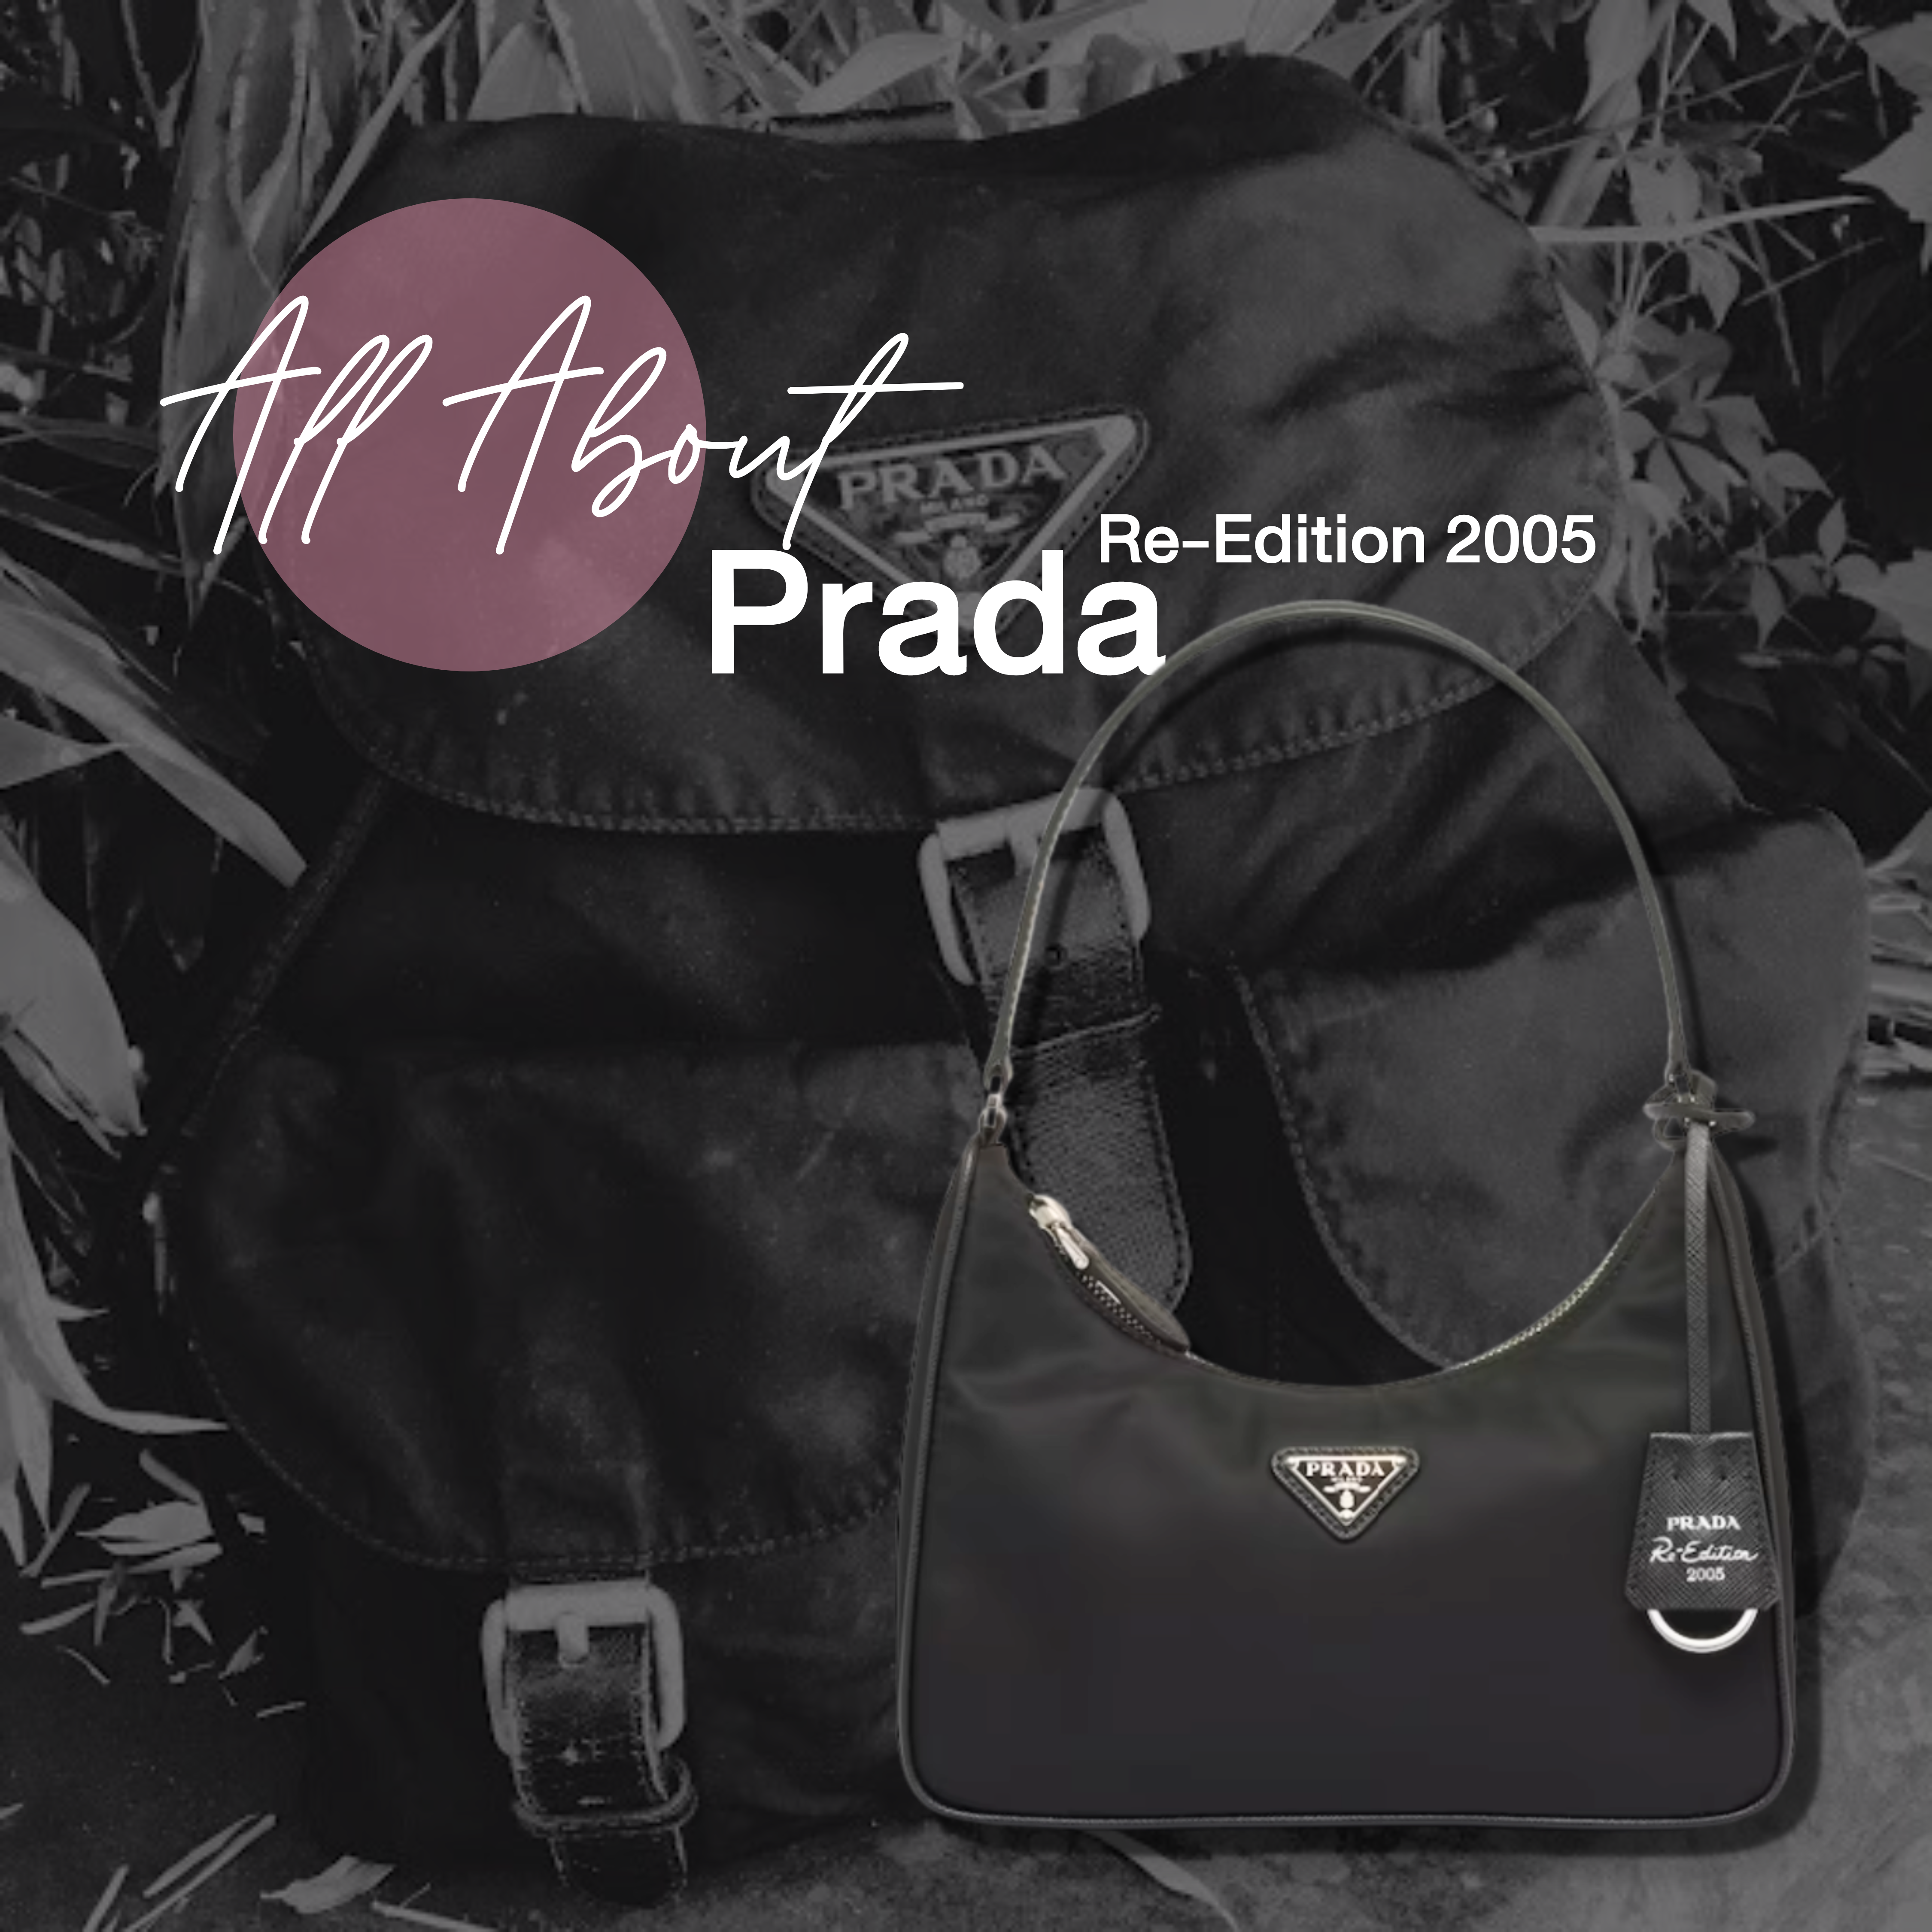 All About Prada Re-Edition 2005